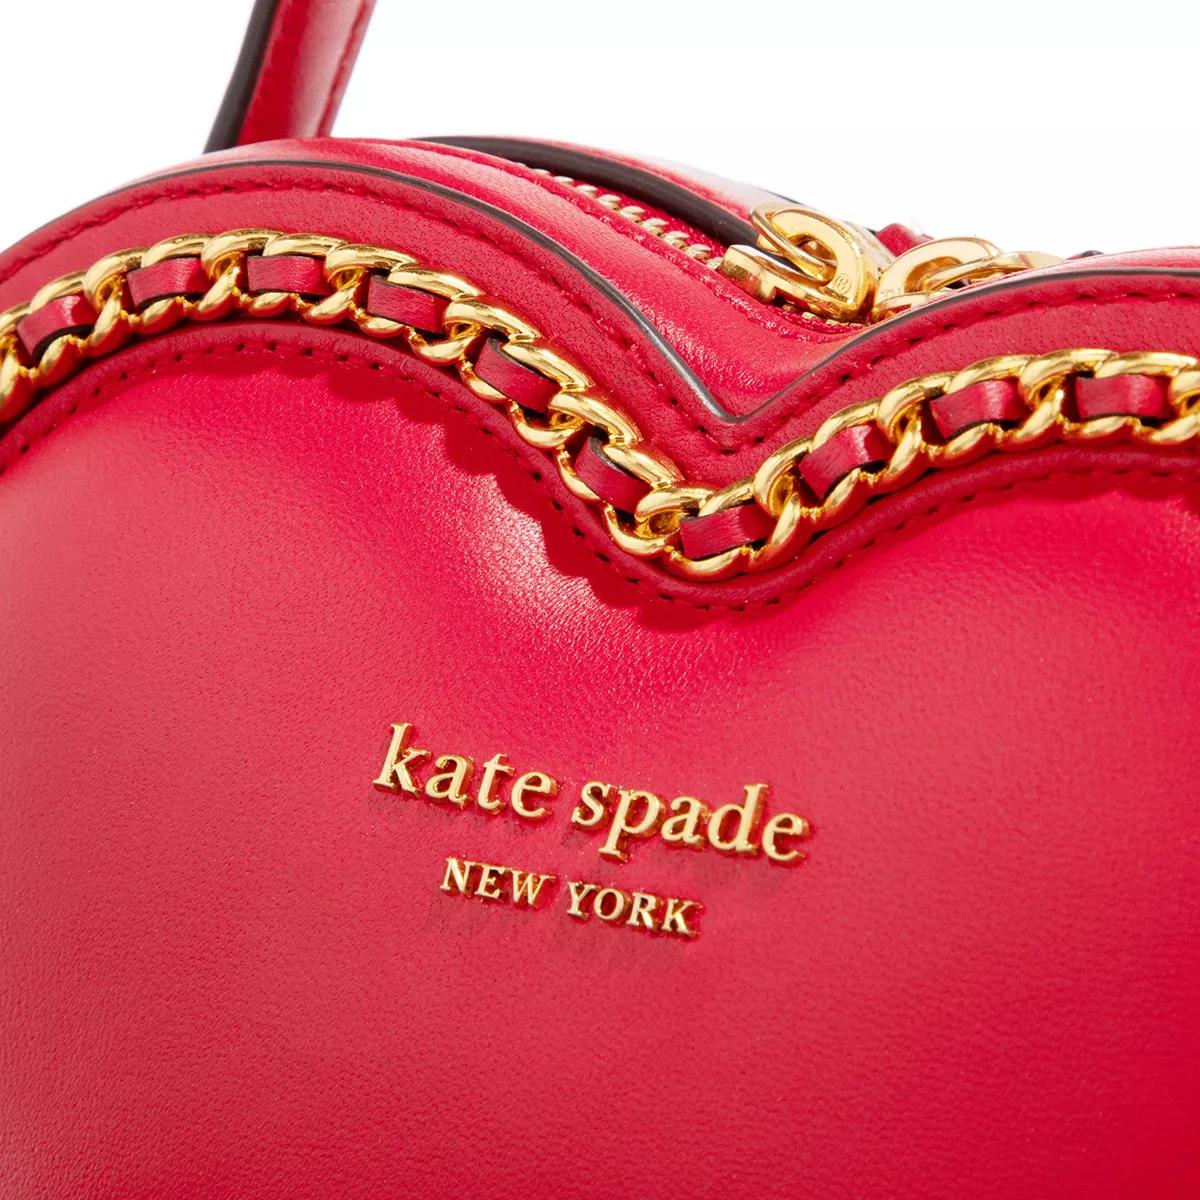 Kate Spade New York Amour Smooth Leather 3D Heart Crossbody Bag - Lingonberry